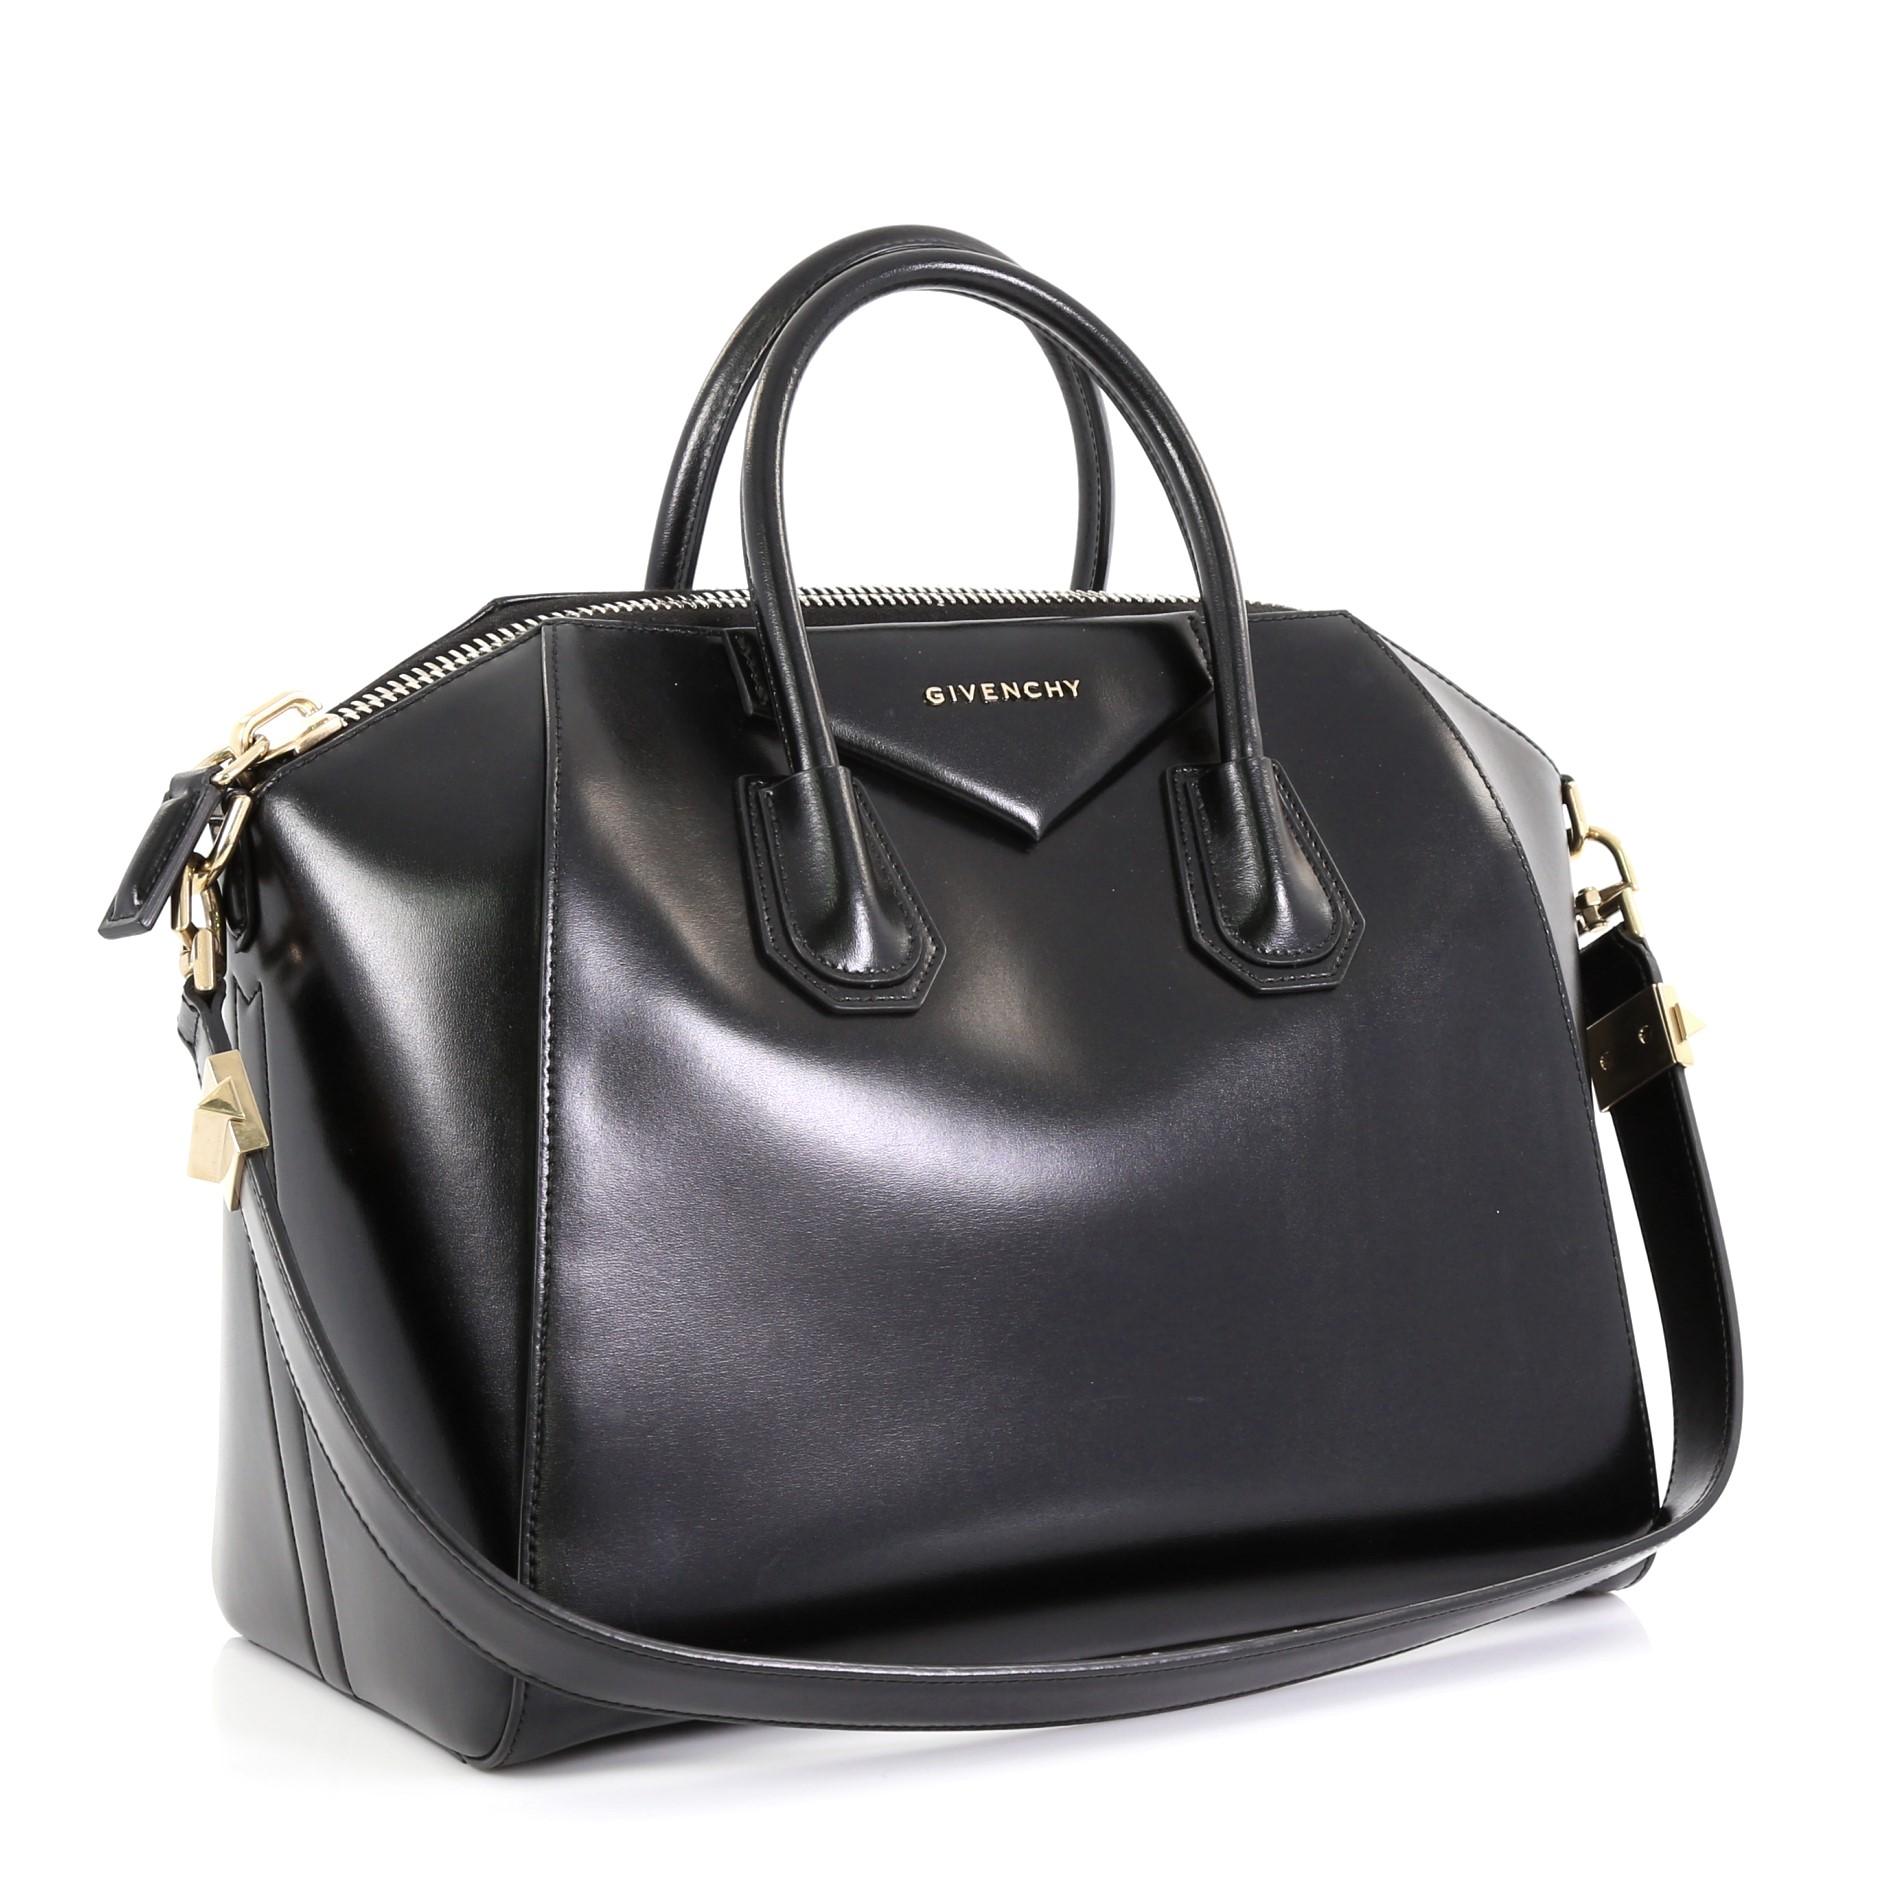 This Givenchy Antigona Bag Glazed Leather Medium, crafted from black glazed leather, features dual rolled leather handles and gold-tone hardware. Its zip closure opens to a black fabric interior with zip and slip pockets. 

Estimated Retail Price: